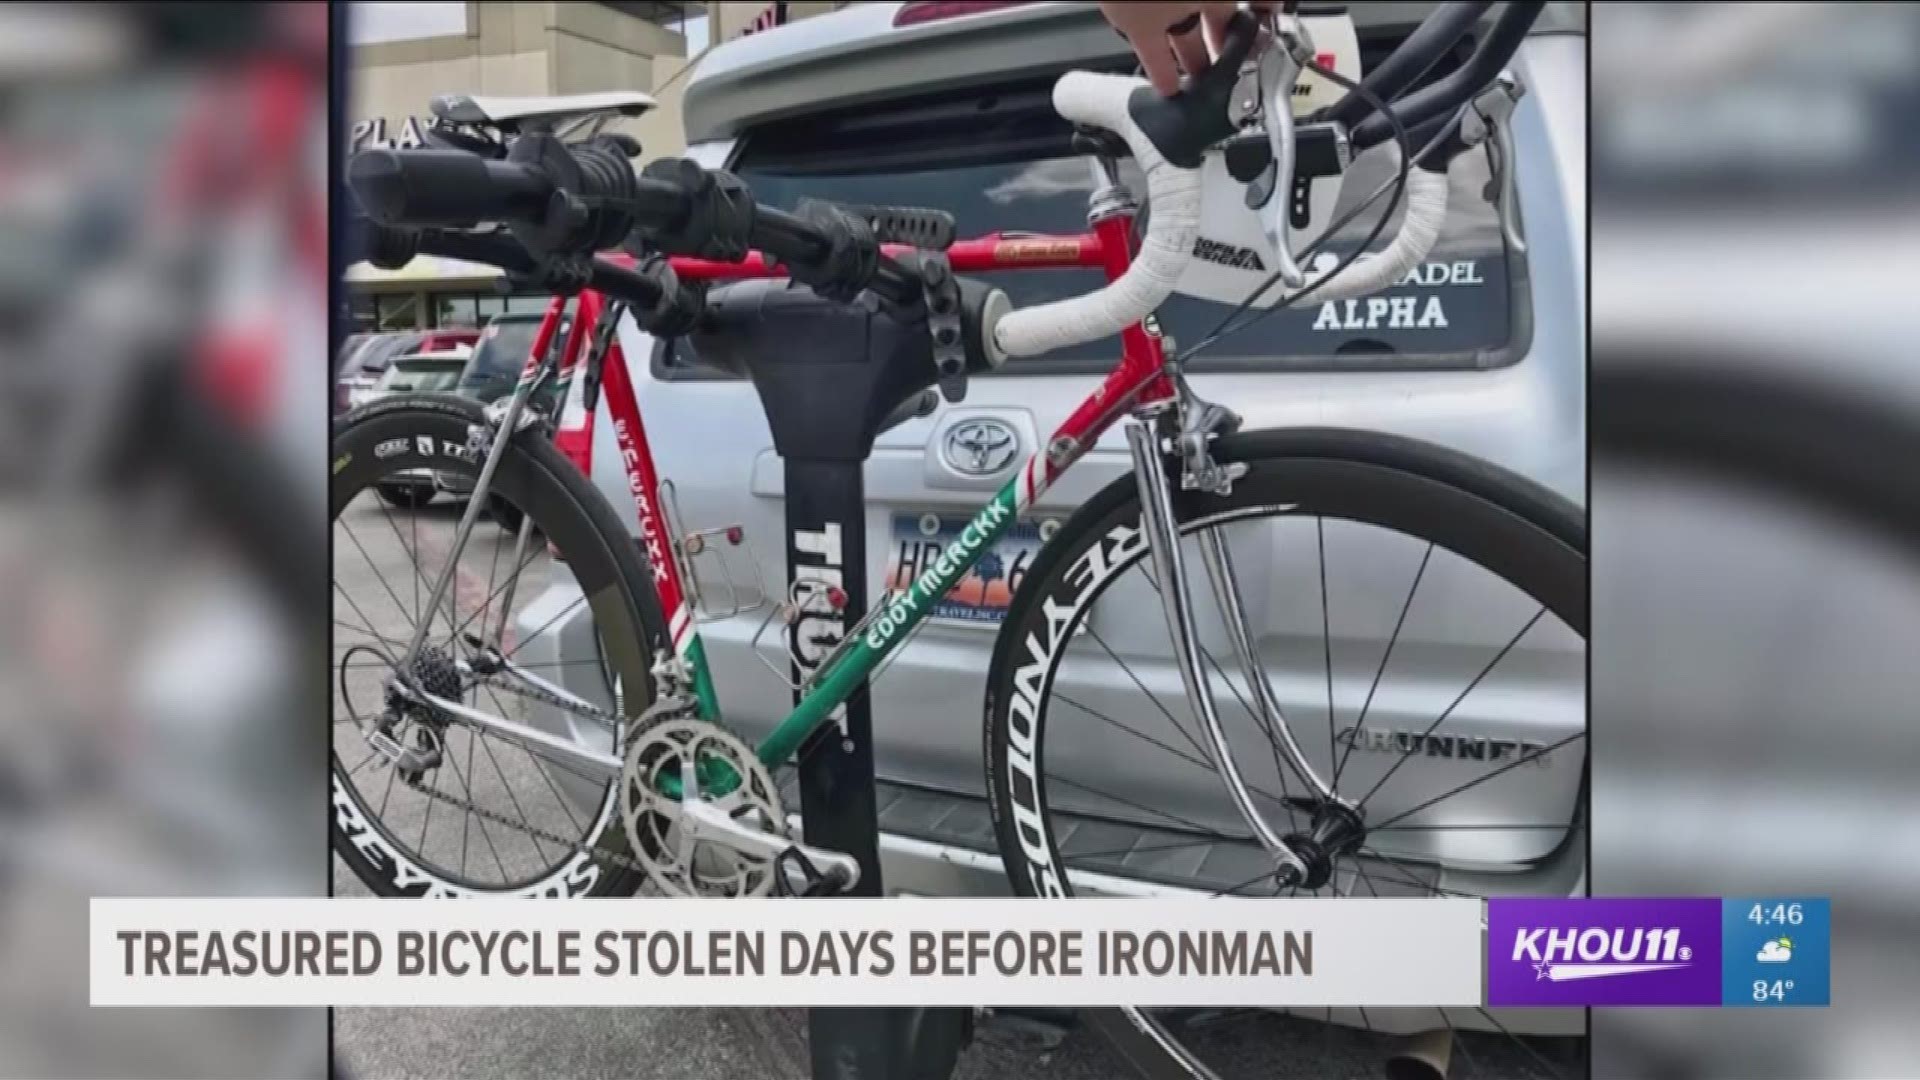 A Dallas man competing in his first IRONMAN triathlon had his training put on hold after someone stole a bike he was using. The bike belonged to his late father.